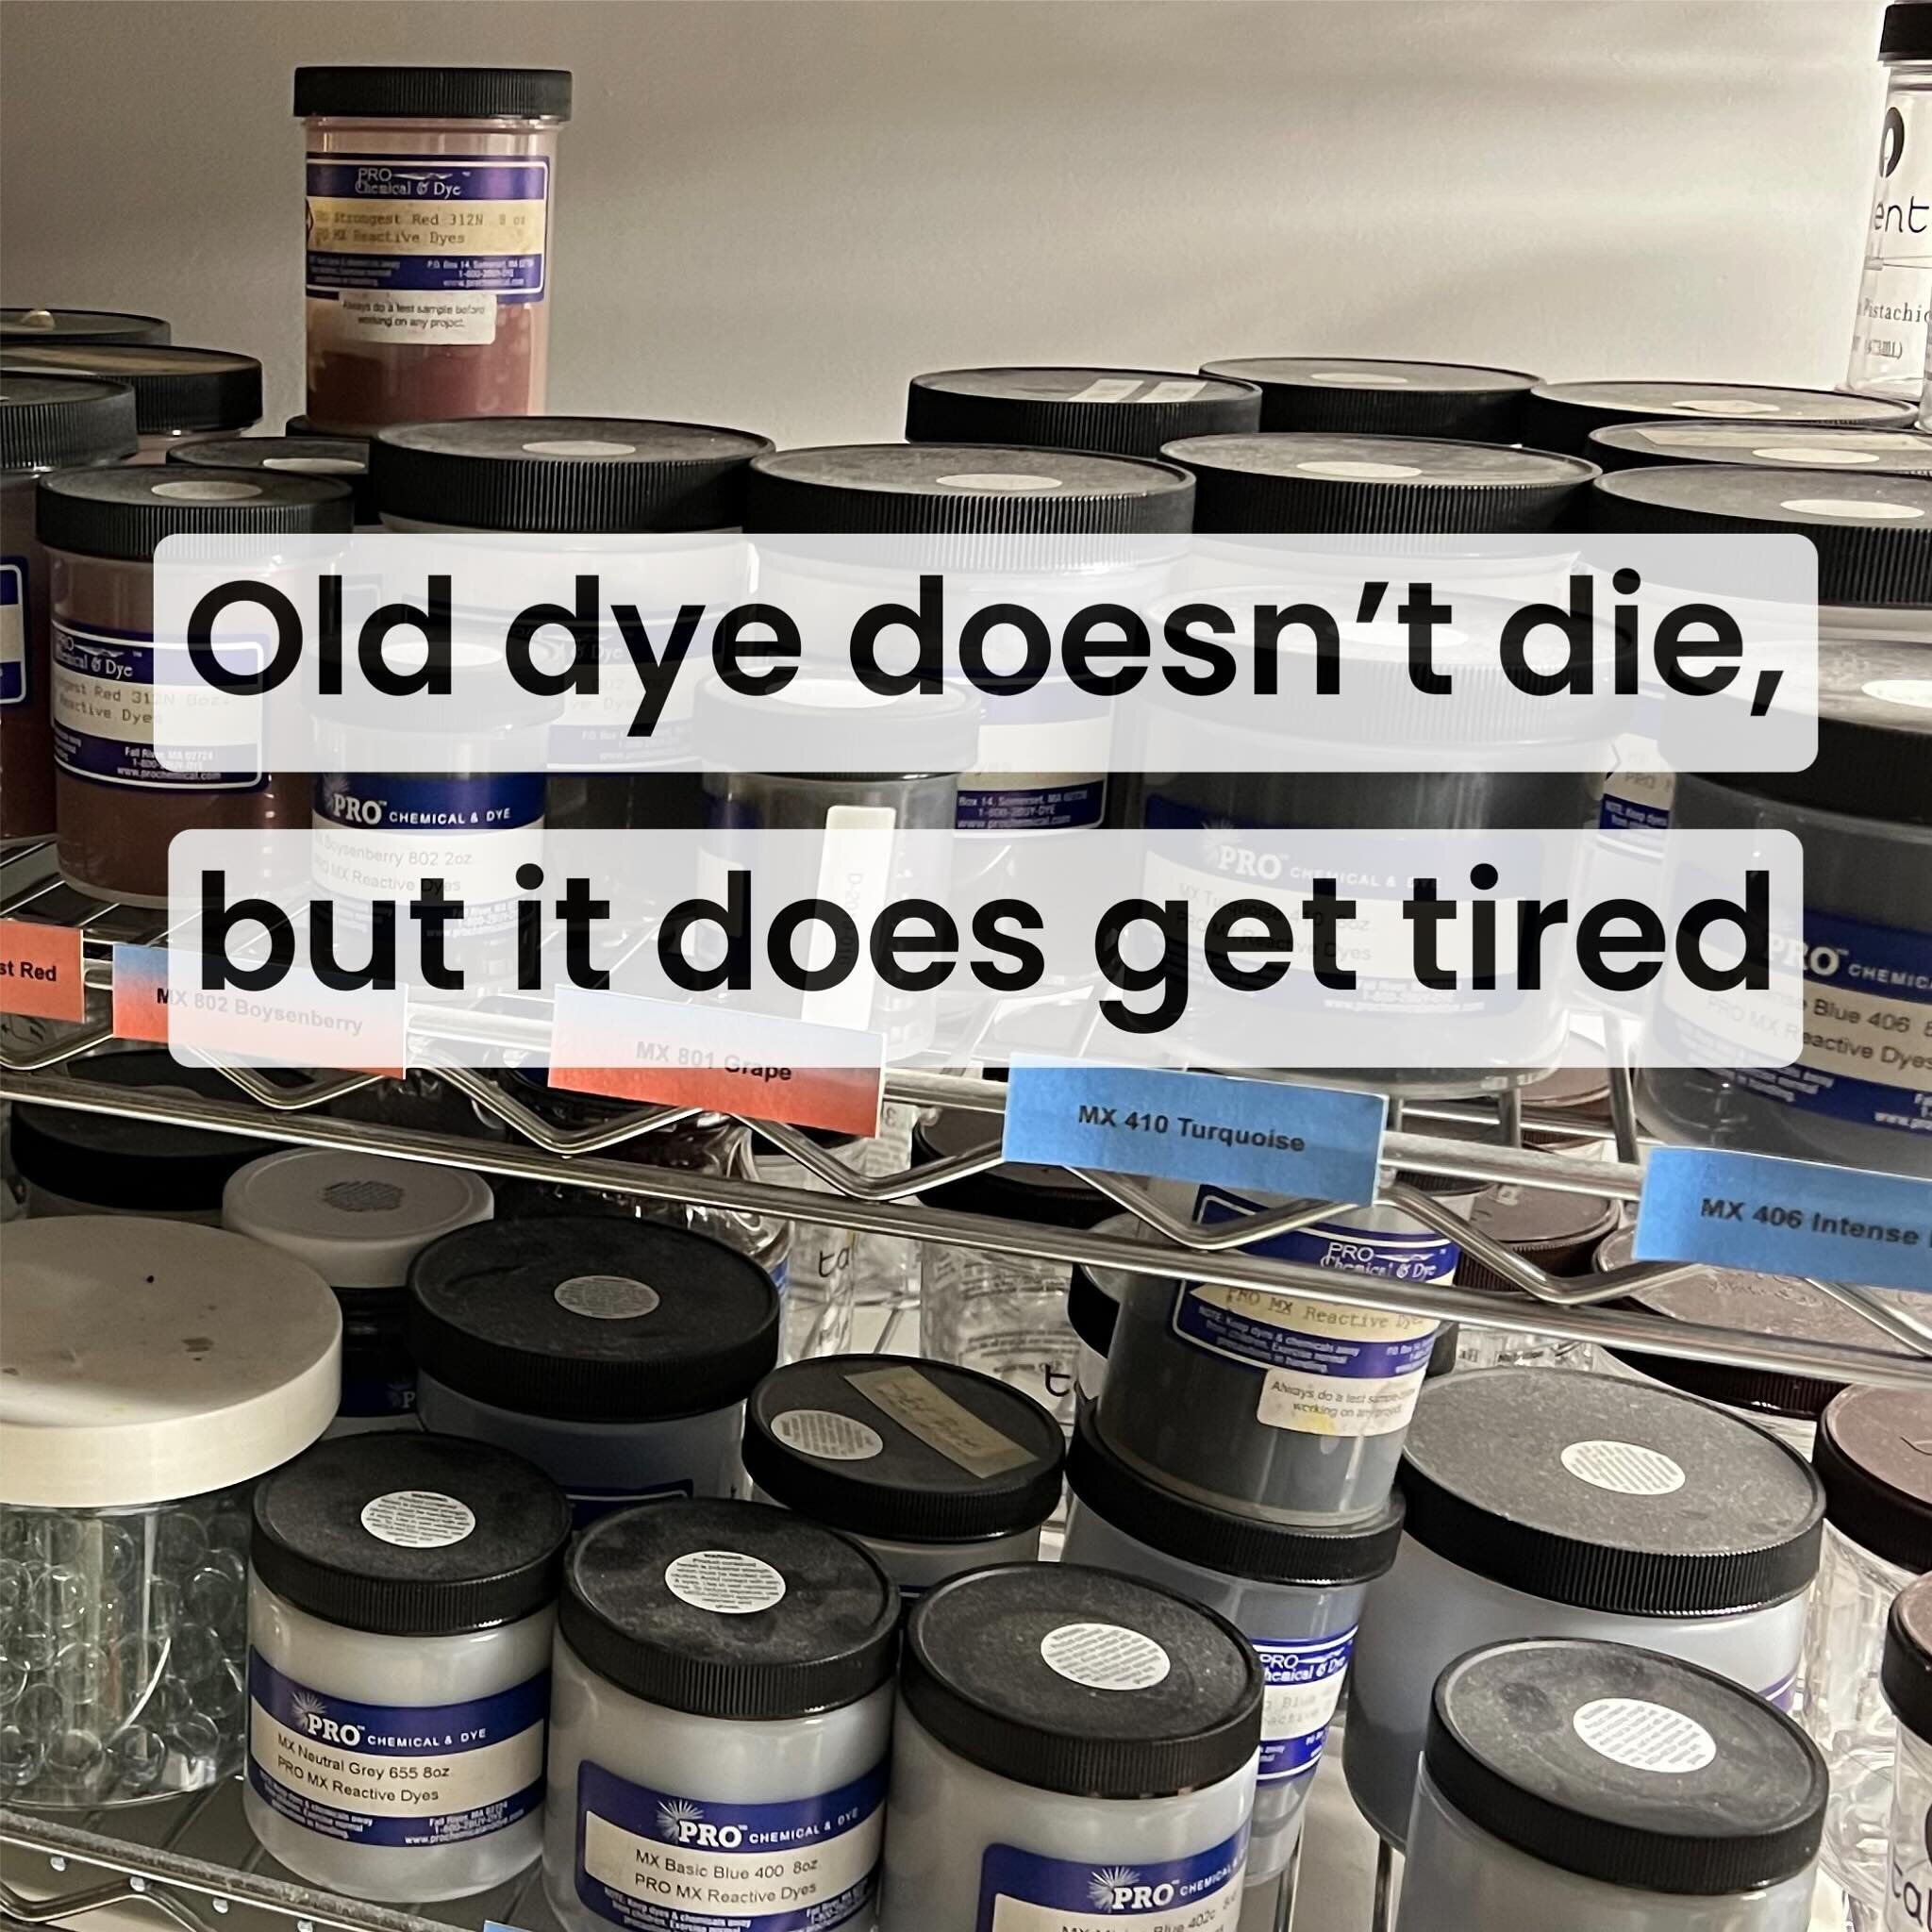 Read my new blog post. It&rsquo;s a techie look at how we can get the most out of old MX dye powder. 
You&rsquo;ll find the link under my bio or by clicking the New Writing story, above. #mxdyes @artclothnetwork @hyattsvillefiberartsguild